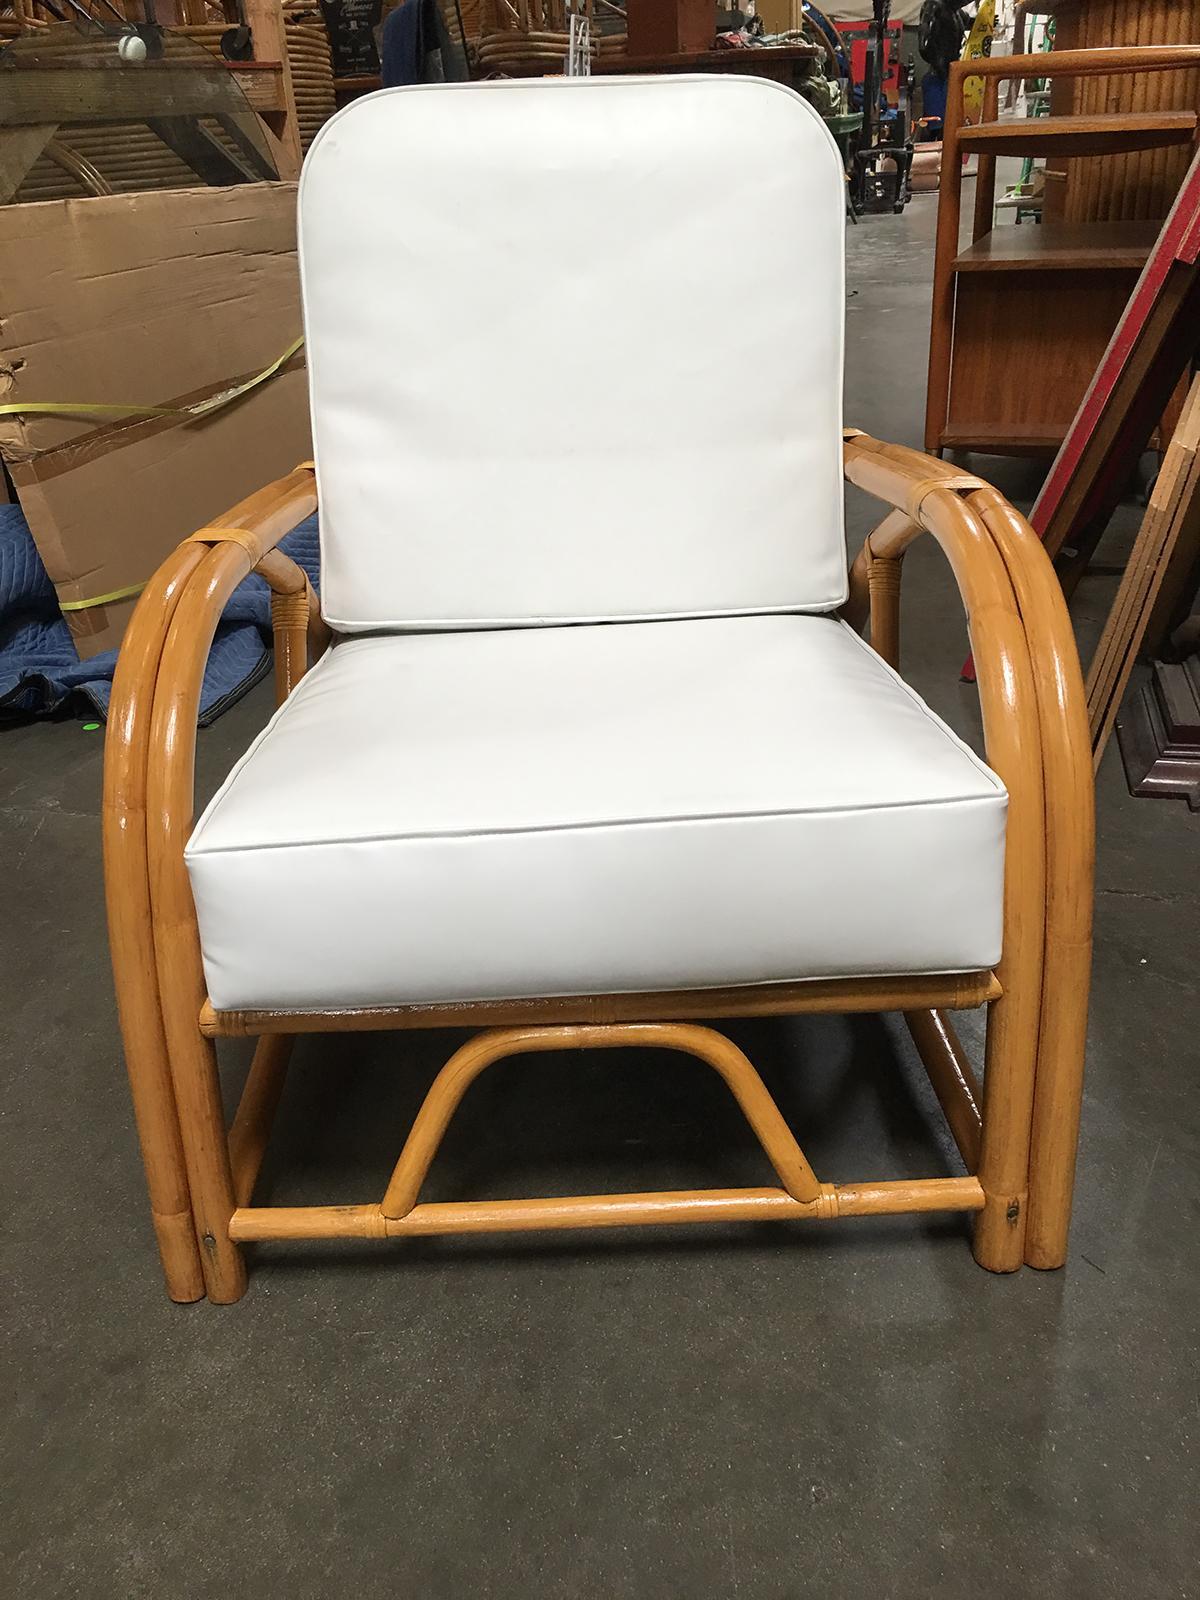 This rare rattan reclining lounge chair with arched 1949 arms. Custom cushions C.O.M. (Costumers Own Material) are included in the price. Simply supply the fabric and we have the cushions made for you. If you need help sourcing fabric we can help!